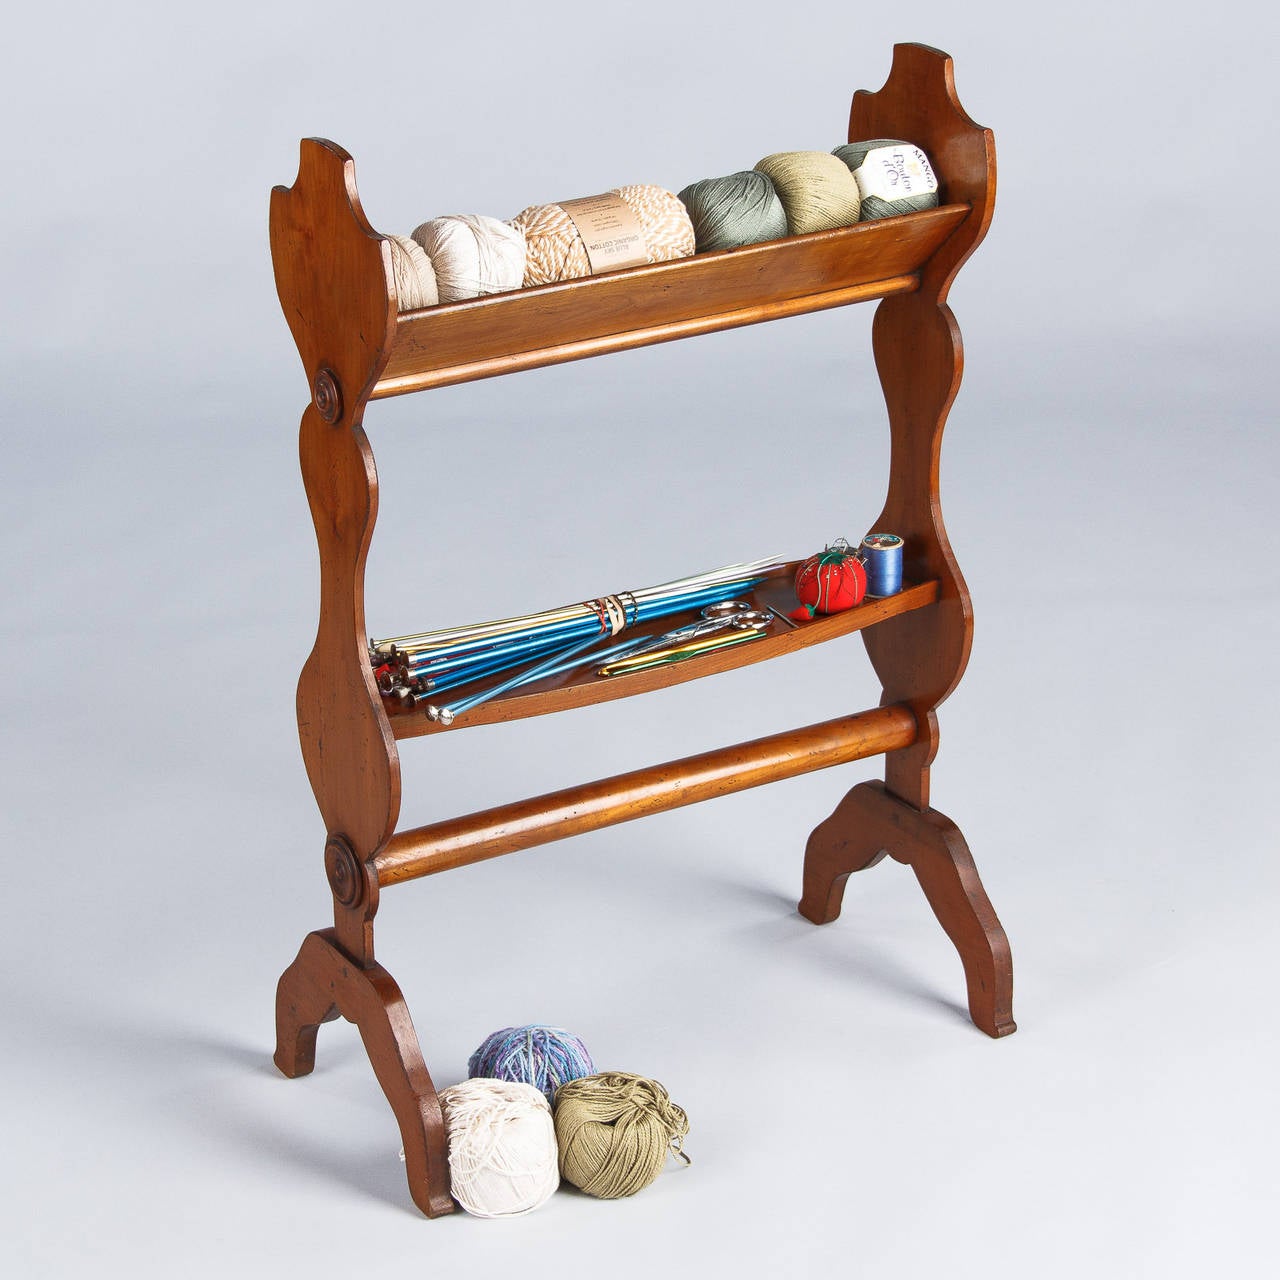 A charming and unusually shaped seamstress table, often called in France 